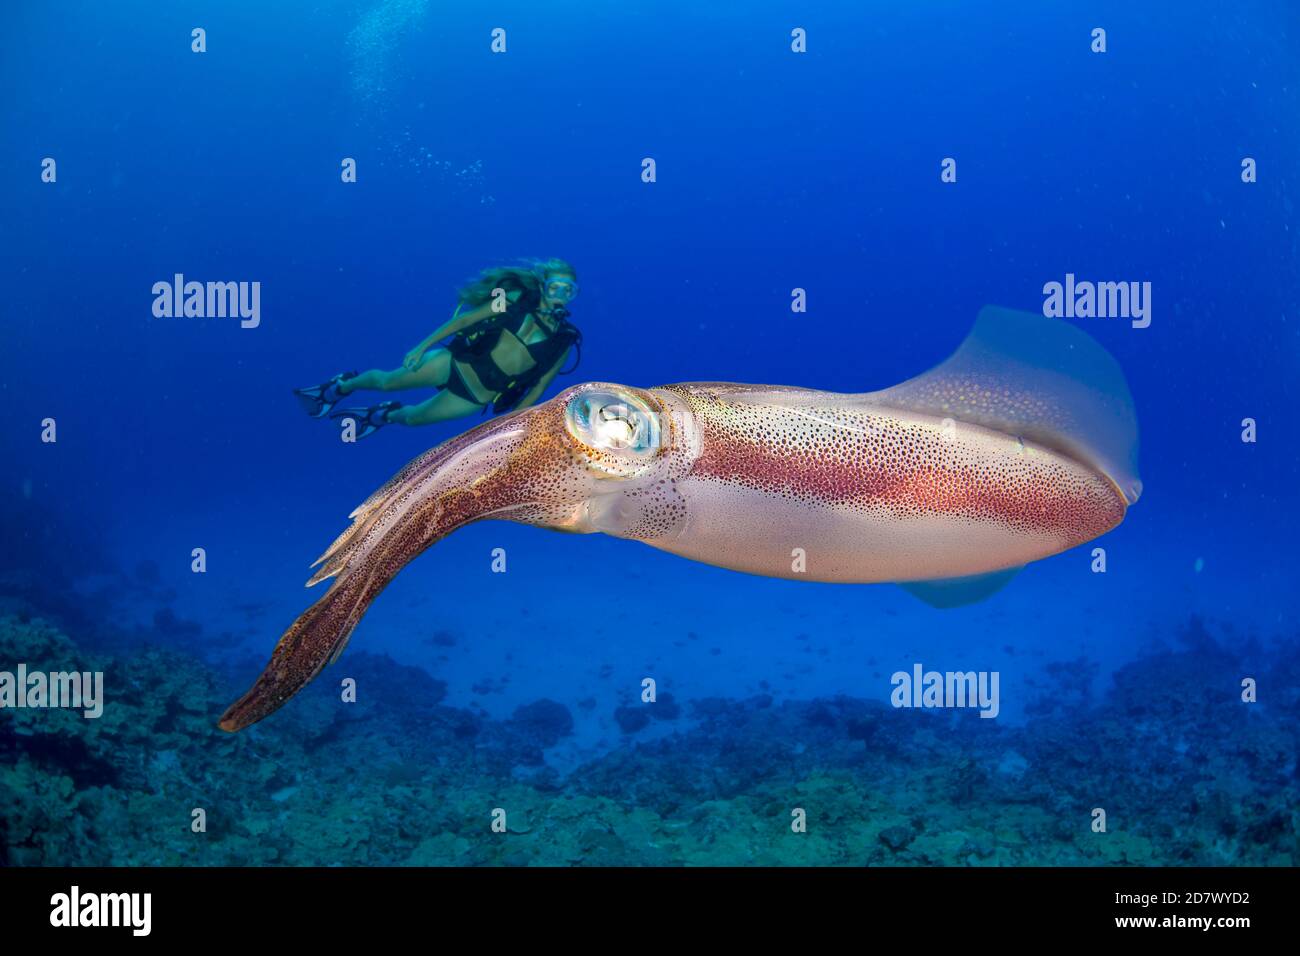 The oval squid, Sepioteuthis lessoniana can reach 14 inches in length.  Photographed off the island of Yap, Micronesia. The diver is model released. Stock Photo